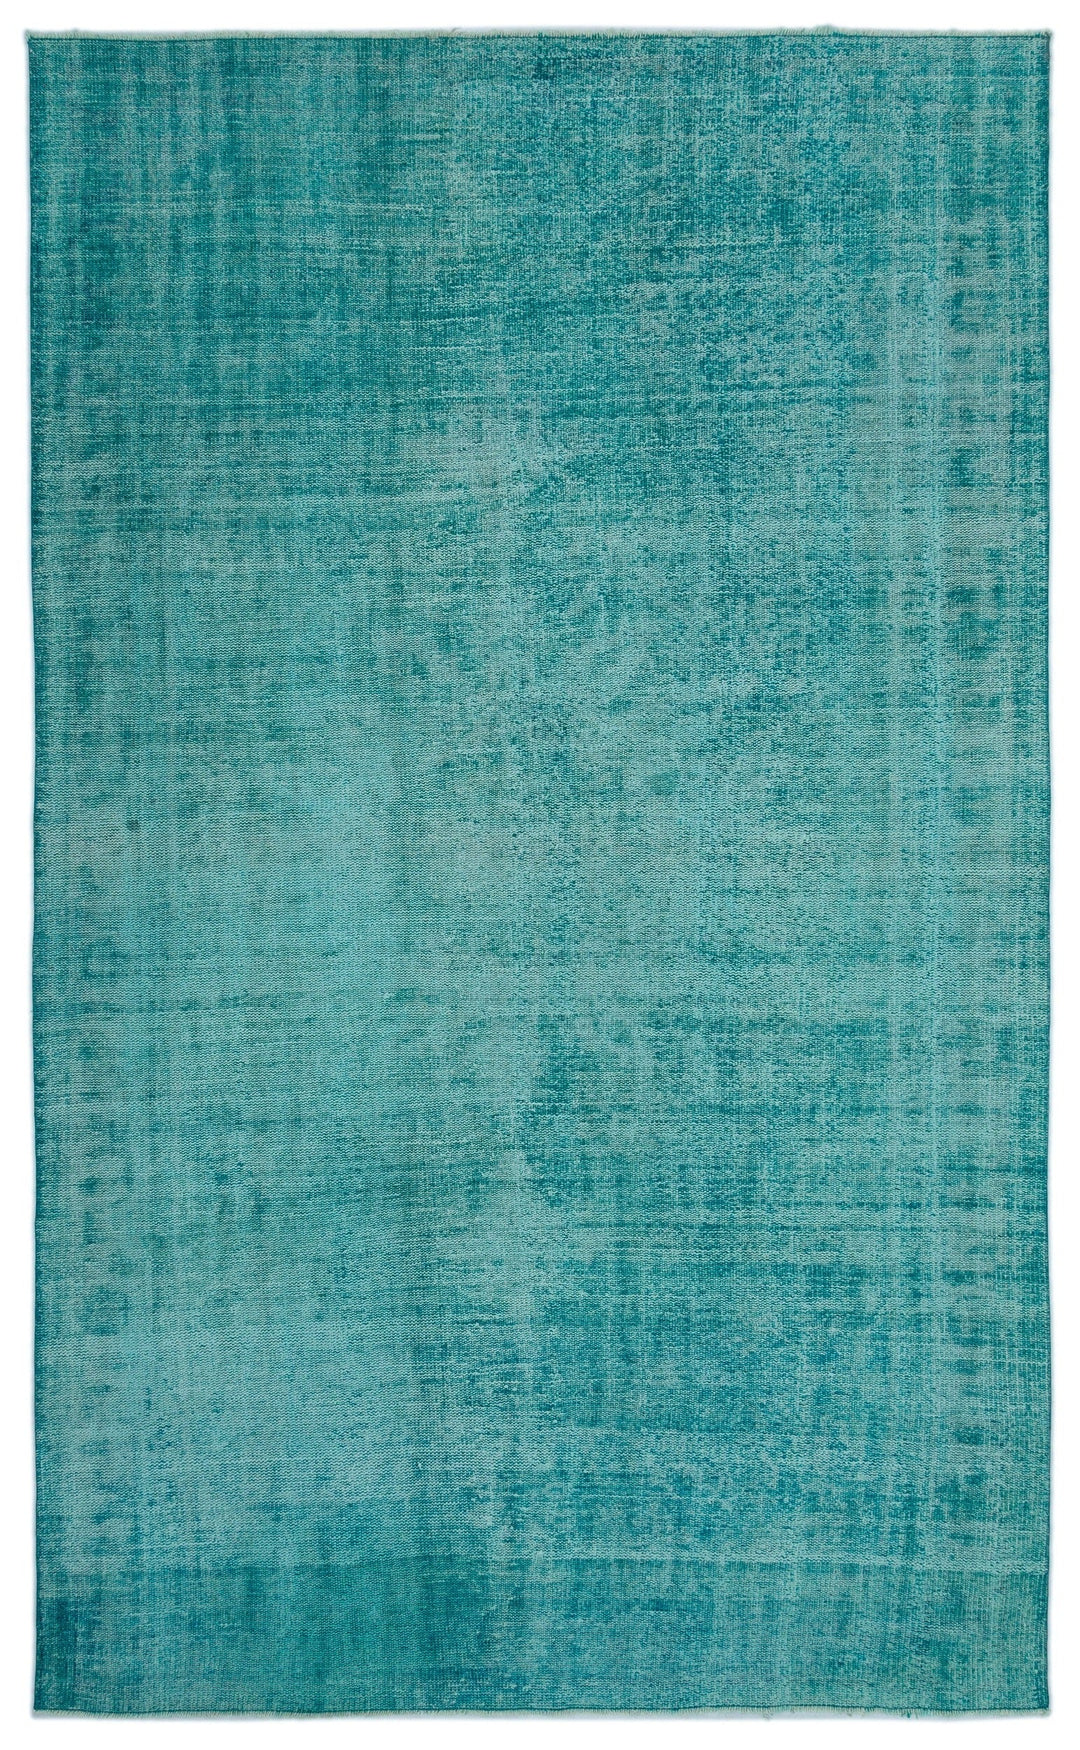 Athens Turquoise Tumbled Wool Hand Woven Rug 191 x 320